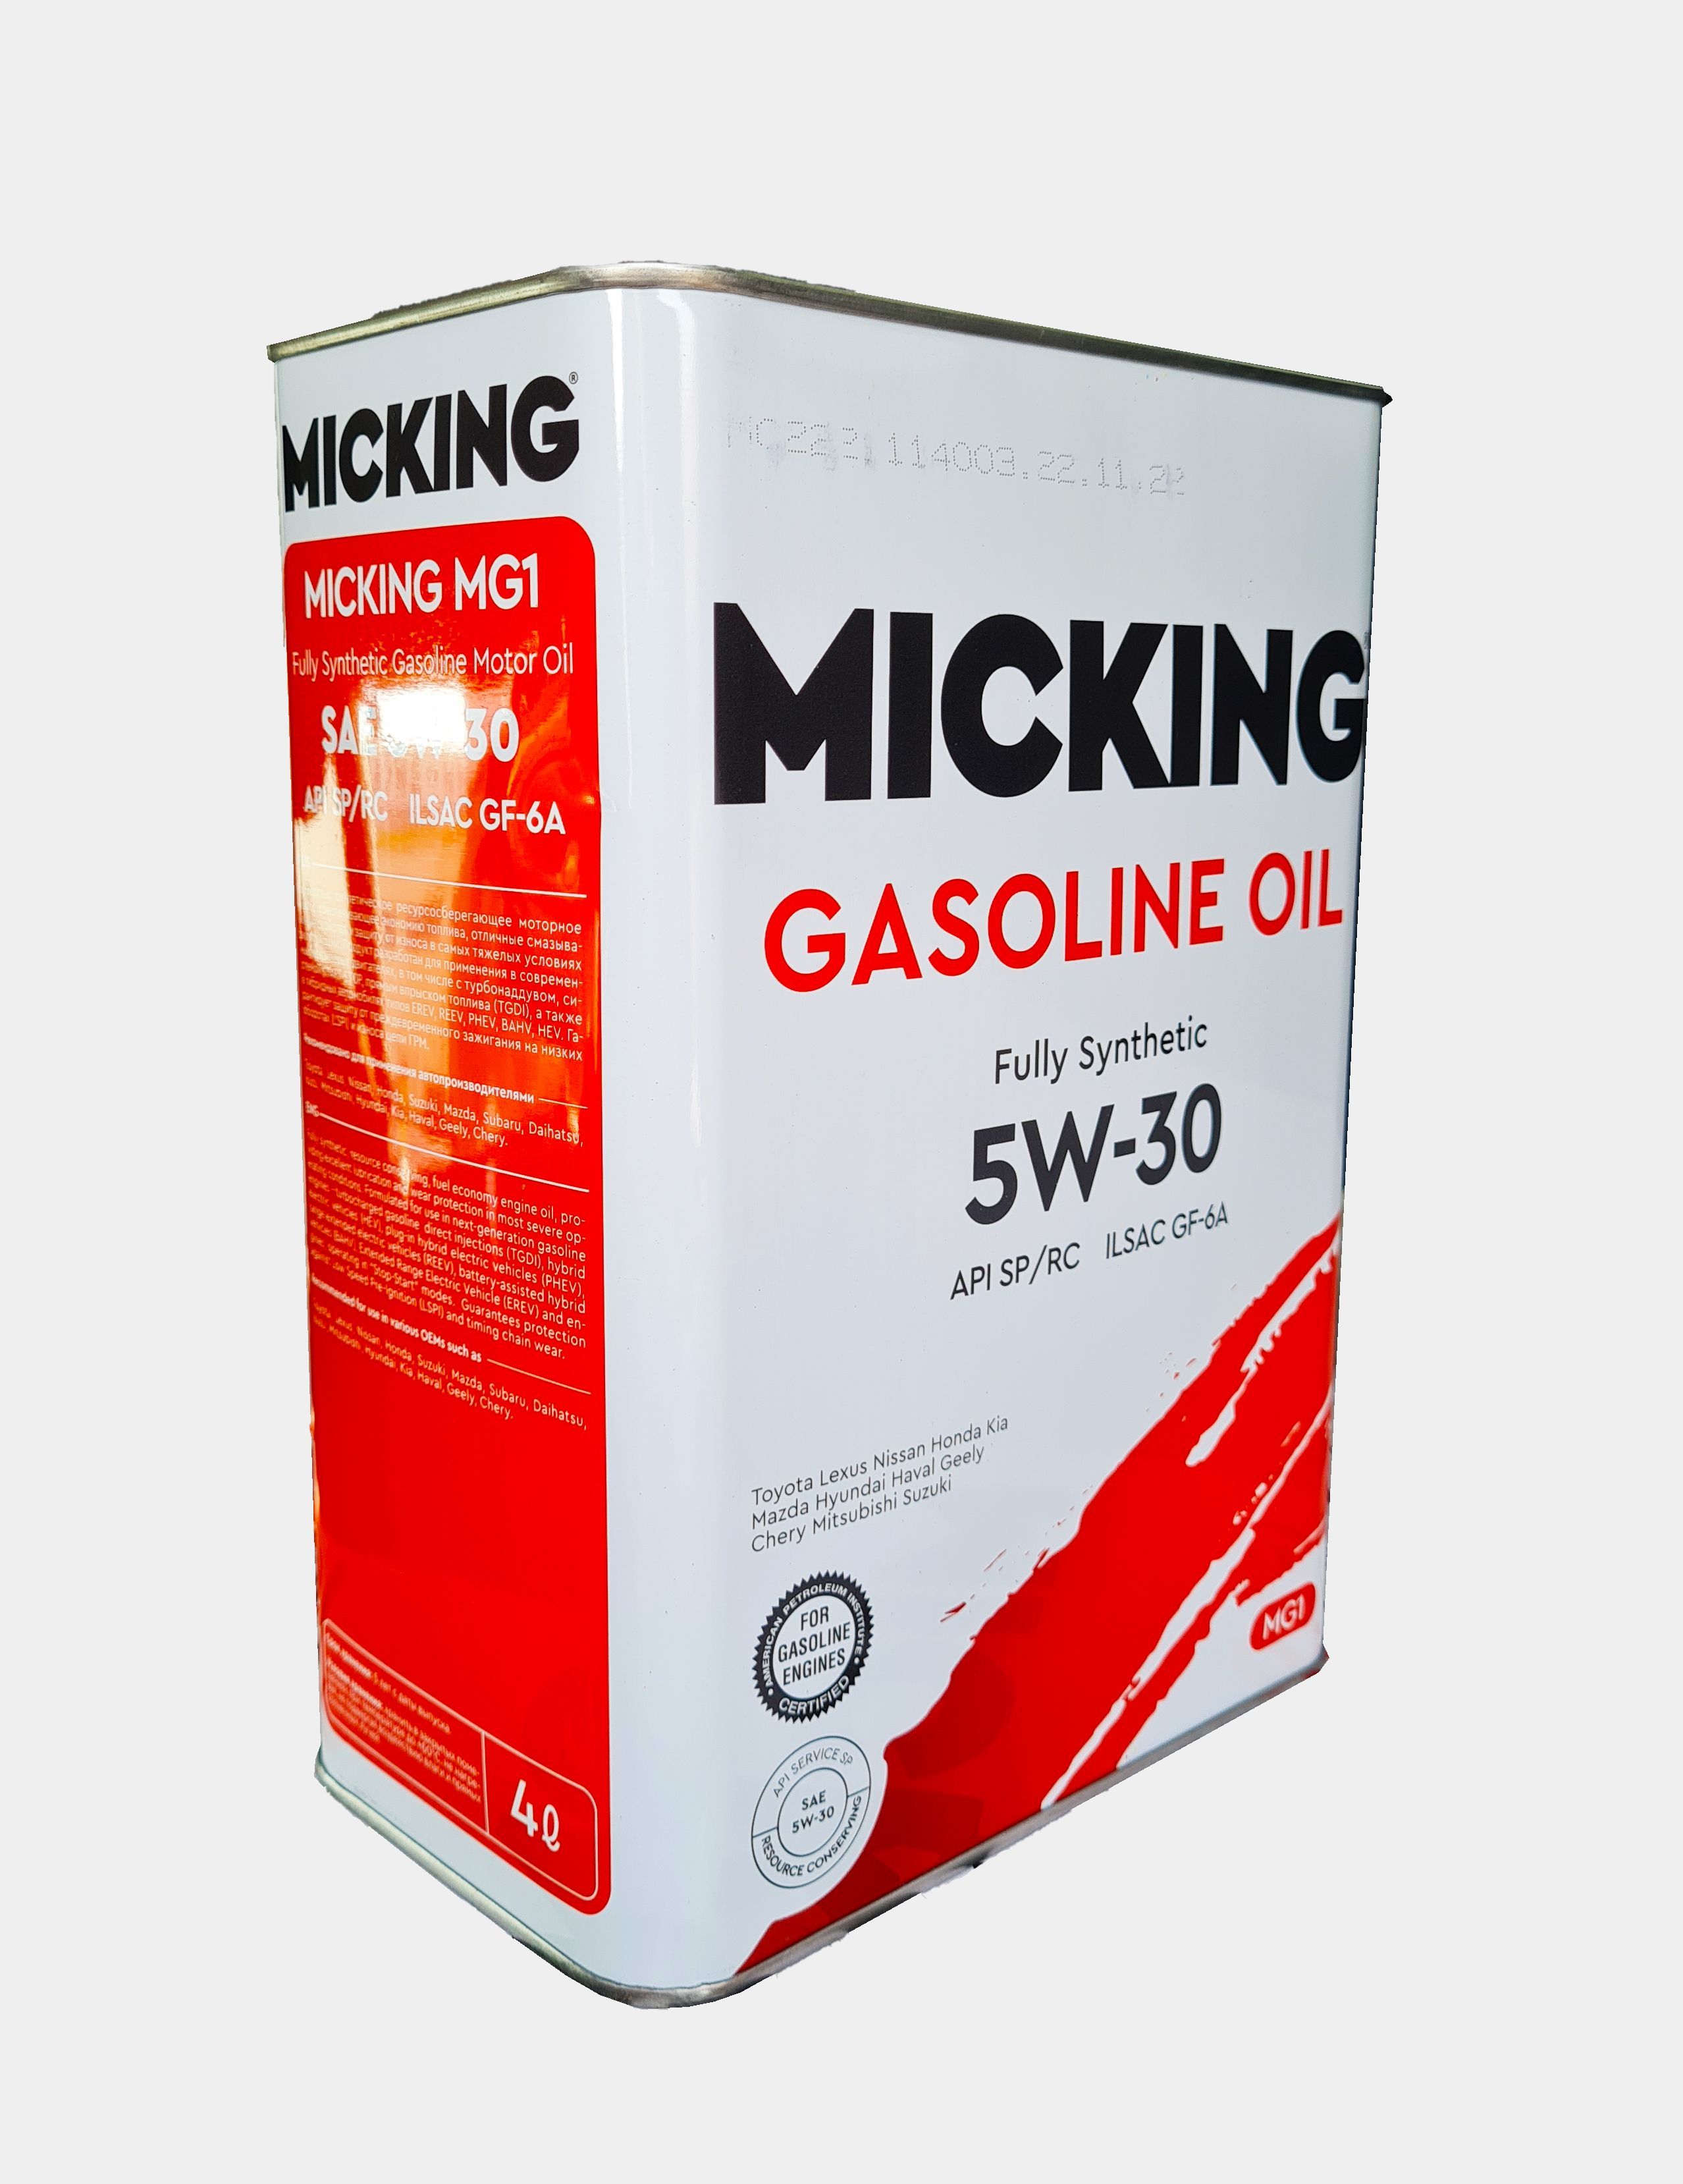 Micking gasoline Oil mg1 5w30 SP/RC. Масло моторное Micking gasoline fully-Synthetic 5w-30 синтетическое 4 л. Micking 5w30 синтетика отзывы.